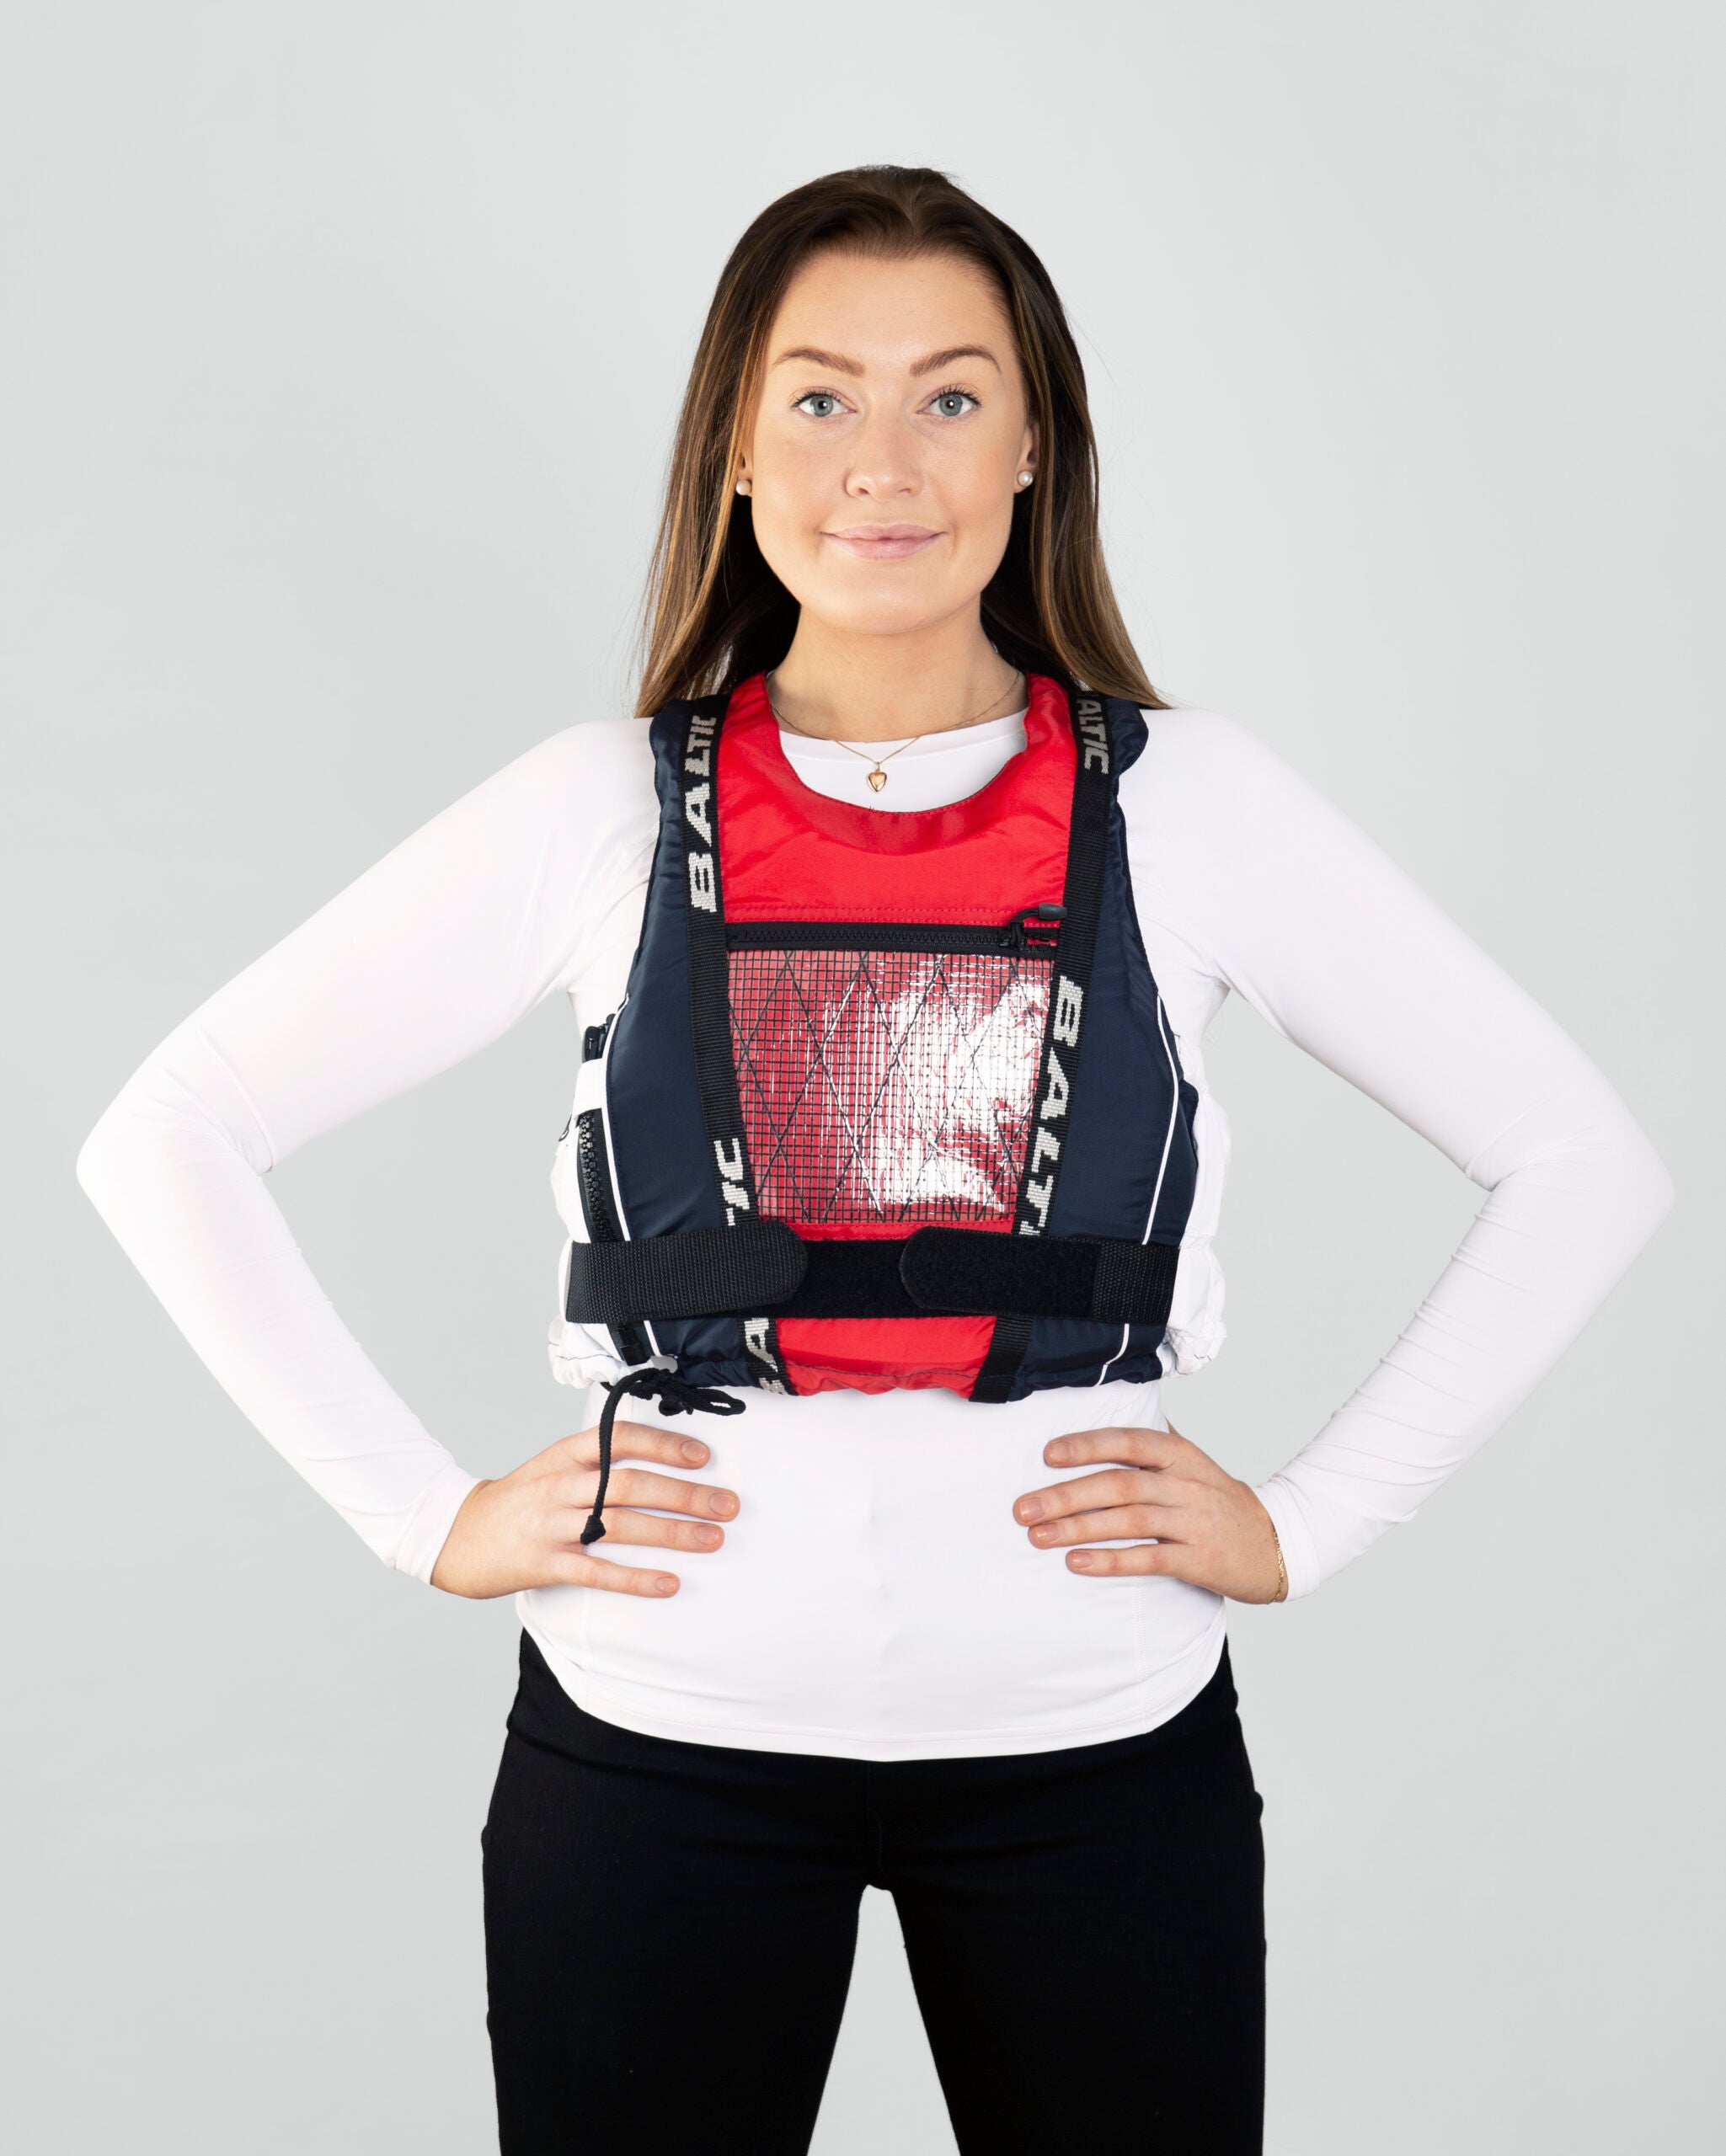 baltic-dinghy-pro-buoyancy-aid-navy-red-white-5706_2-scaled